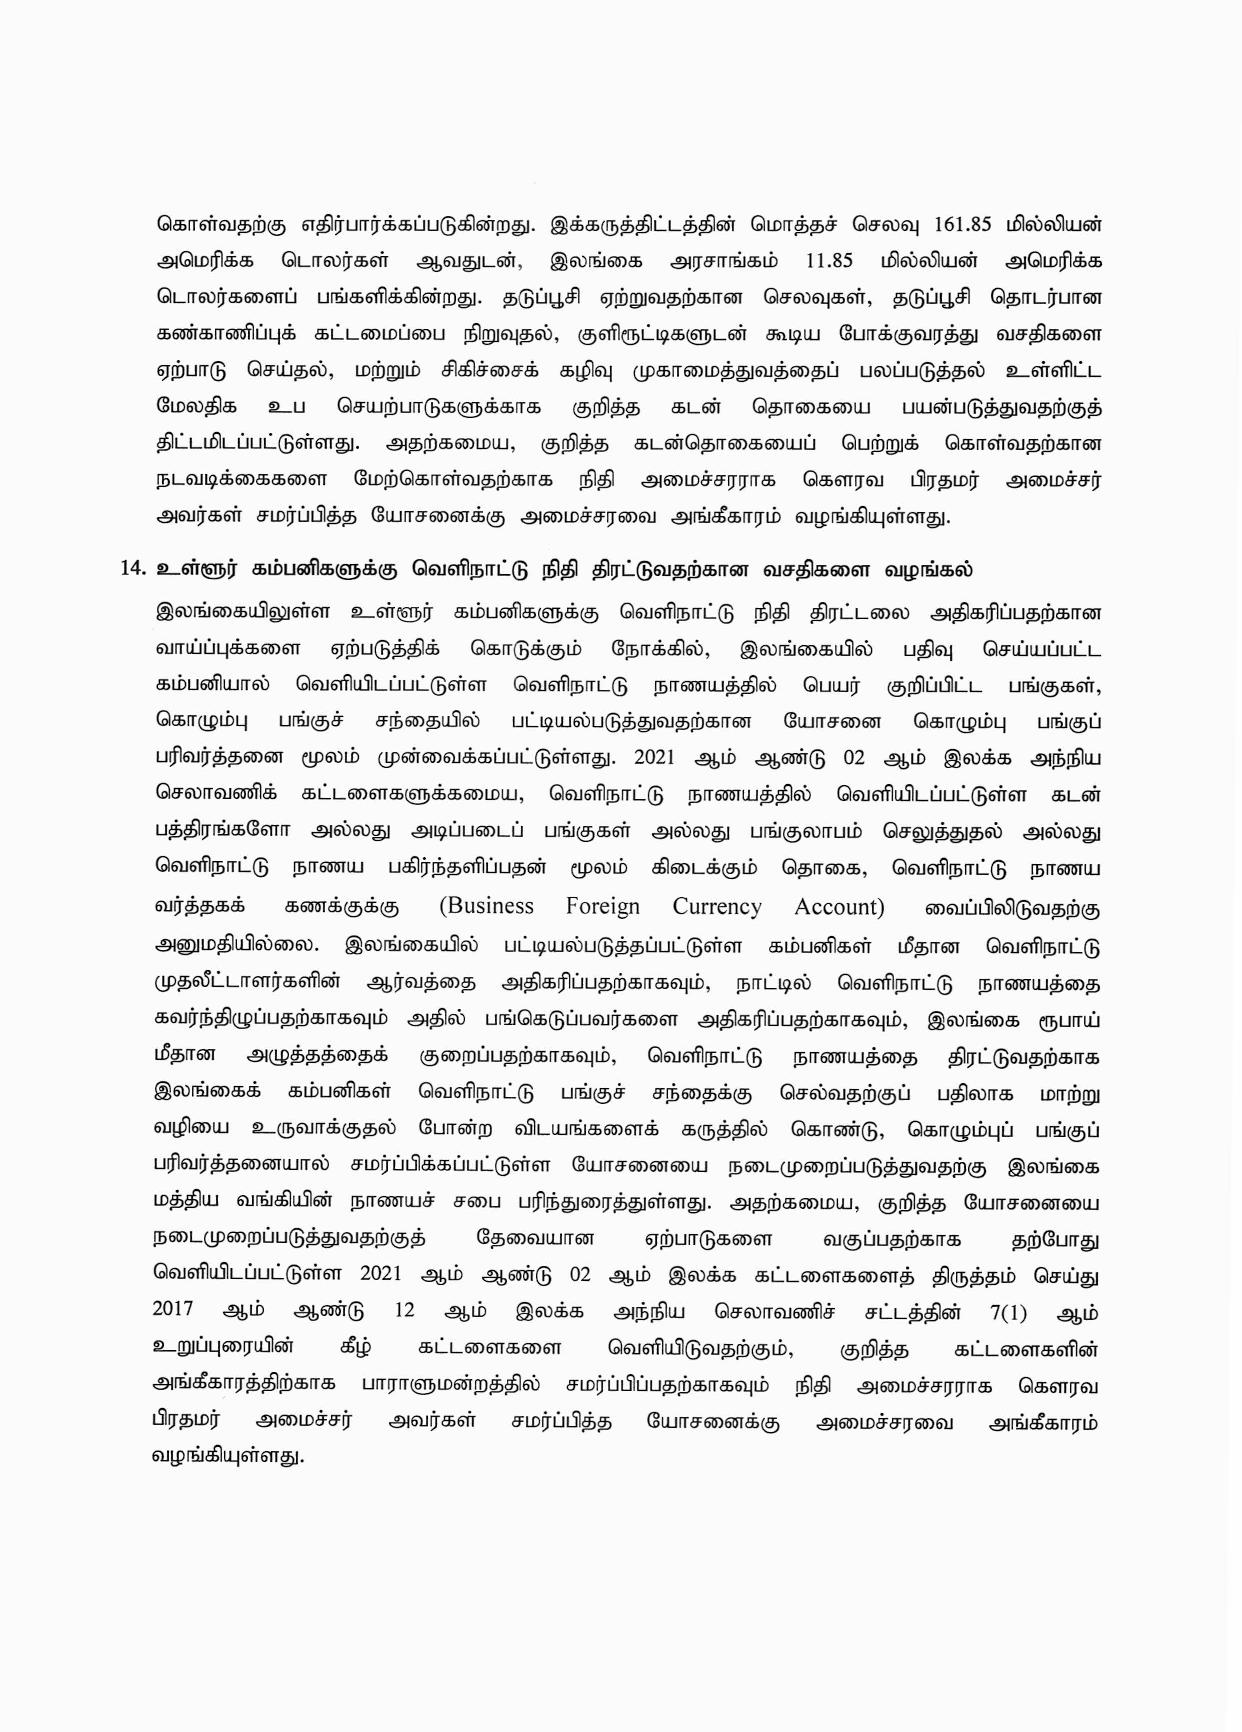 Cabinet Decision on 28.06.2021 Tamil page 007